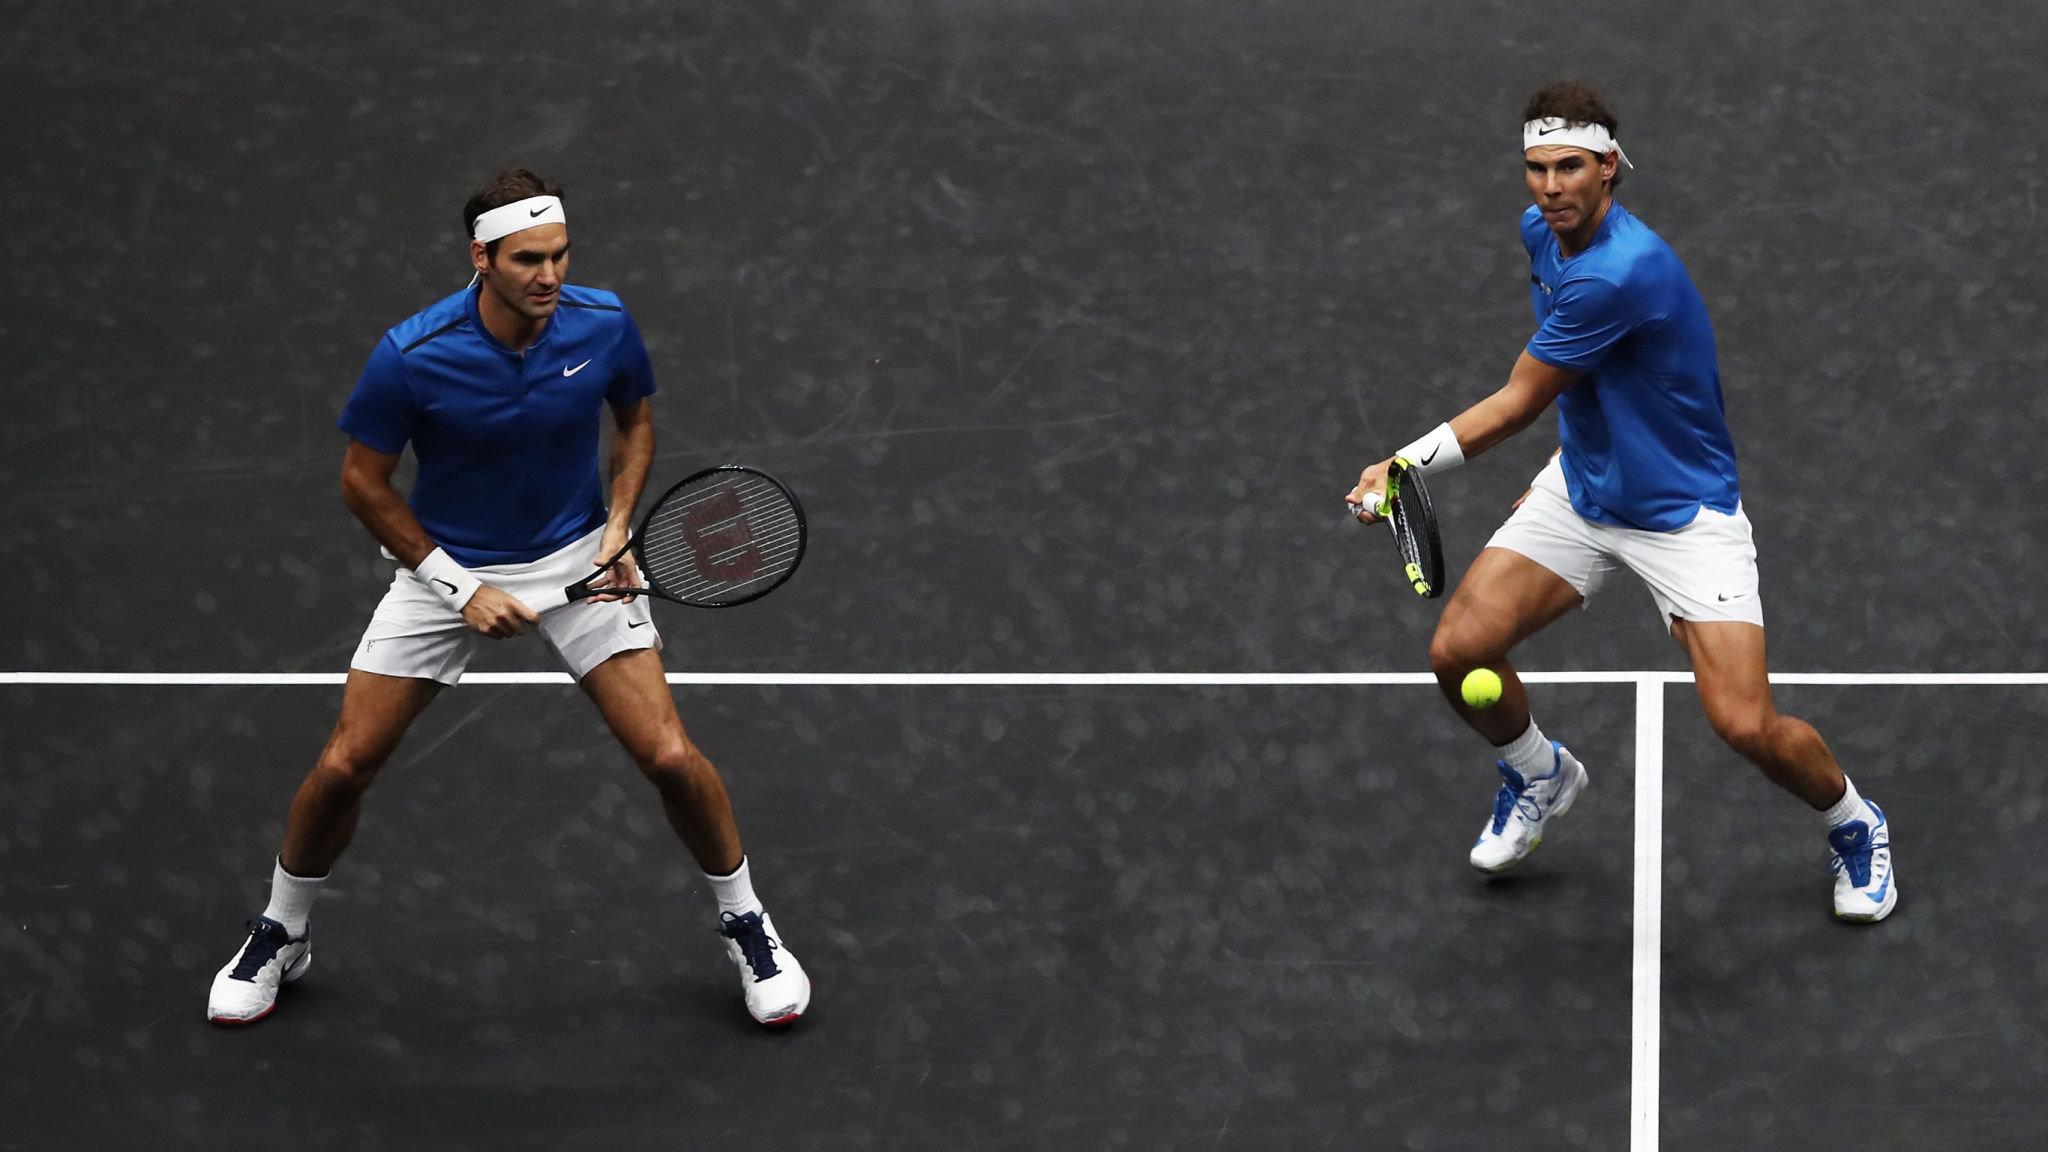 Rafael Nadal and Roger Federer will team up at the 2019